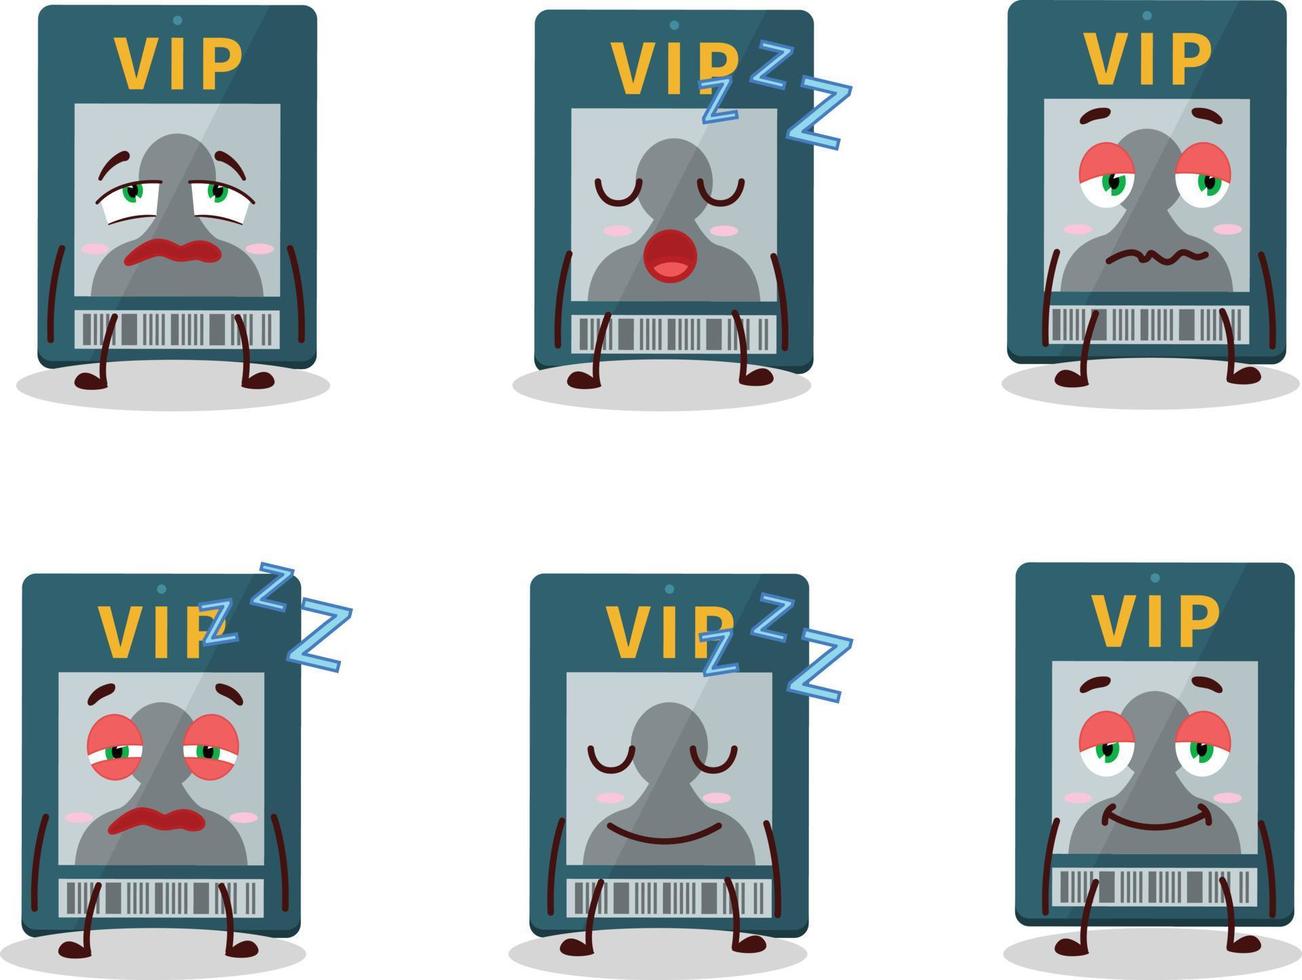 Cartoon character of vip card with sleepy expression vector